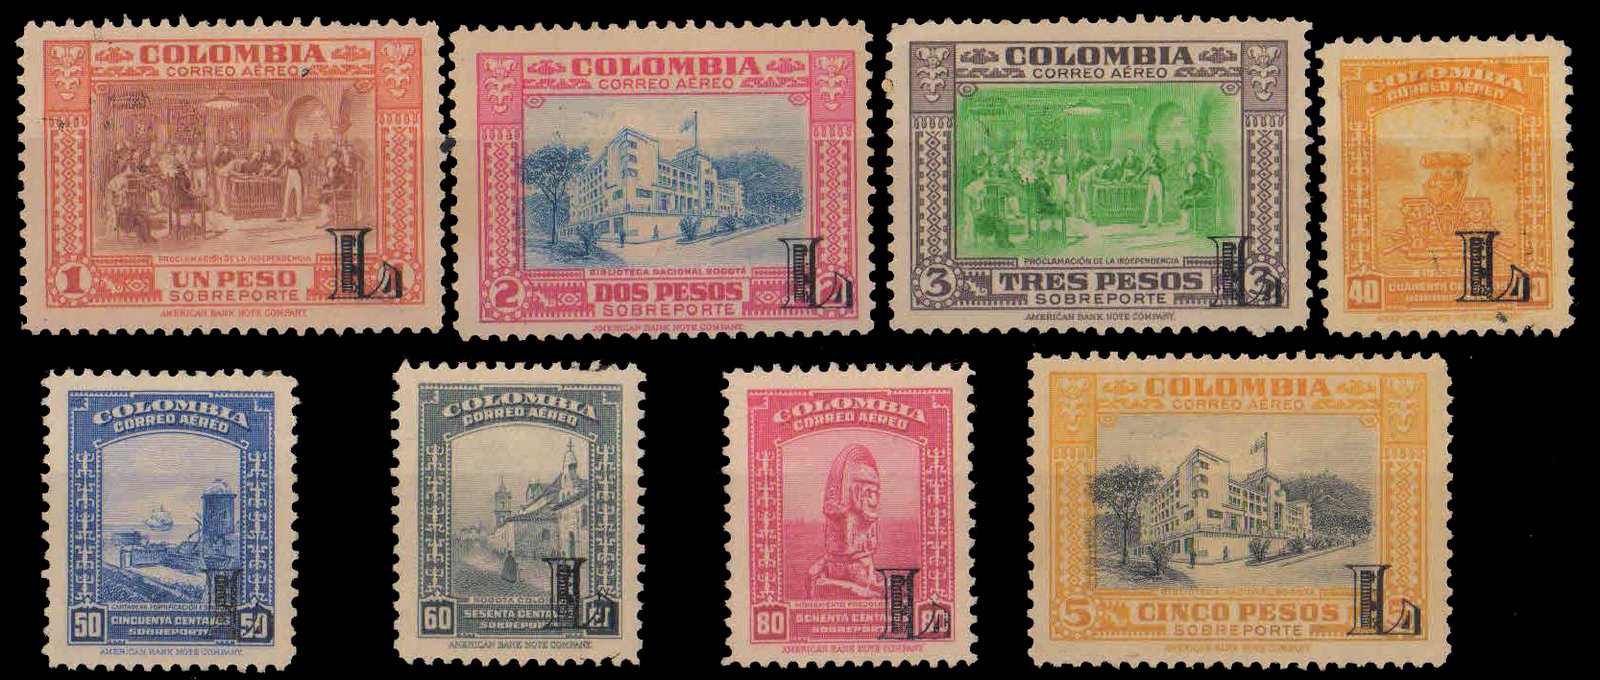 COLOMBIA 1951-Private Air Companies Issue "LANSA" Overprint 'L'-Set of 8-MNH, S.G. 21-28-Cat � 115-